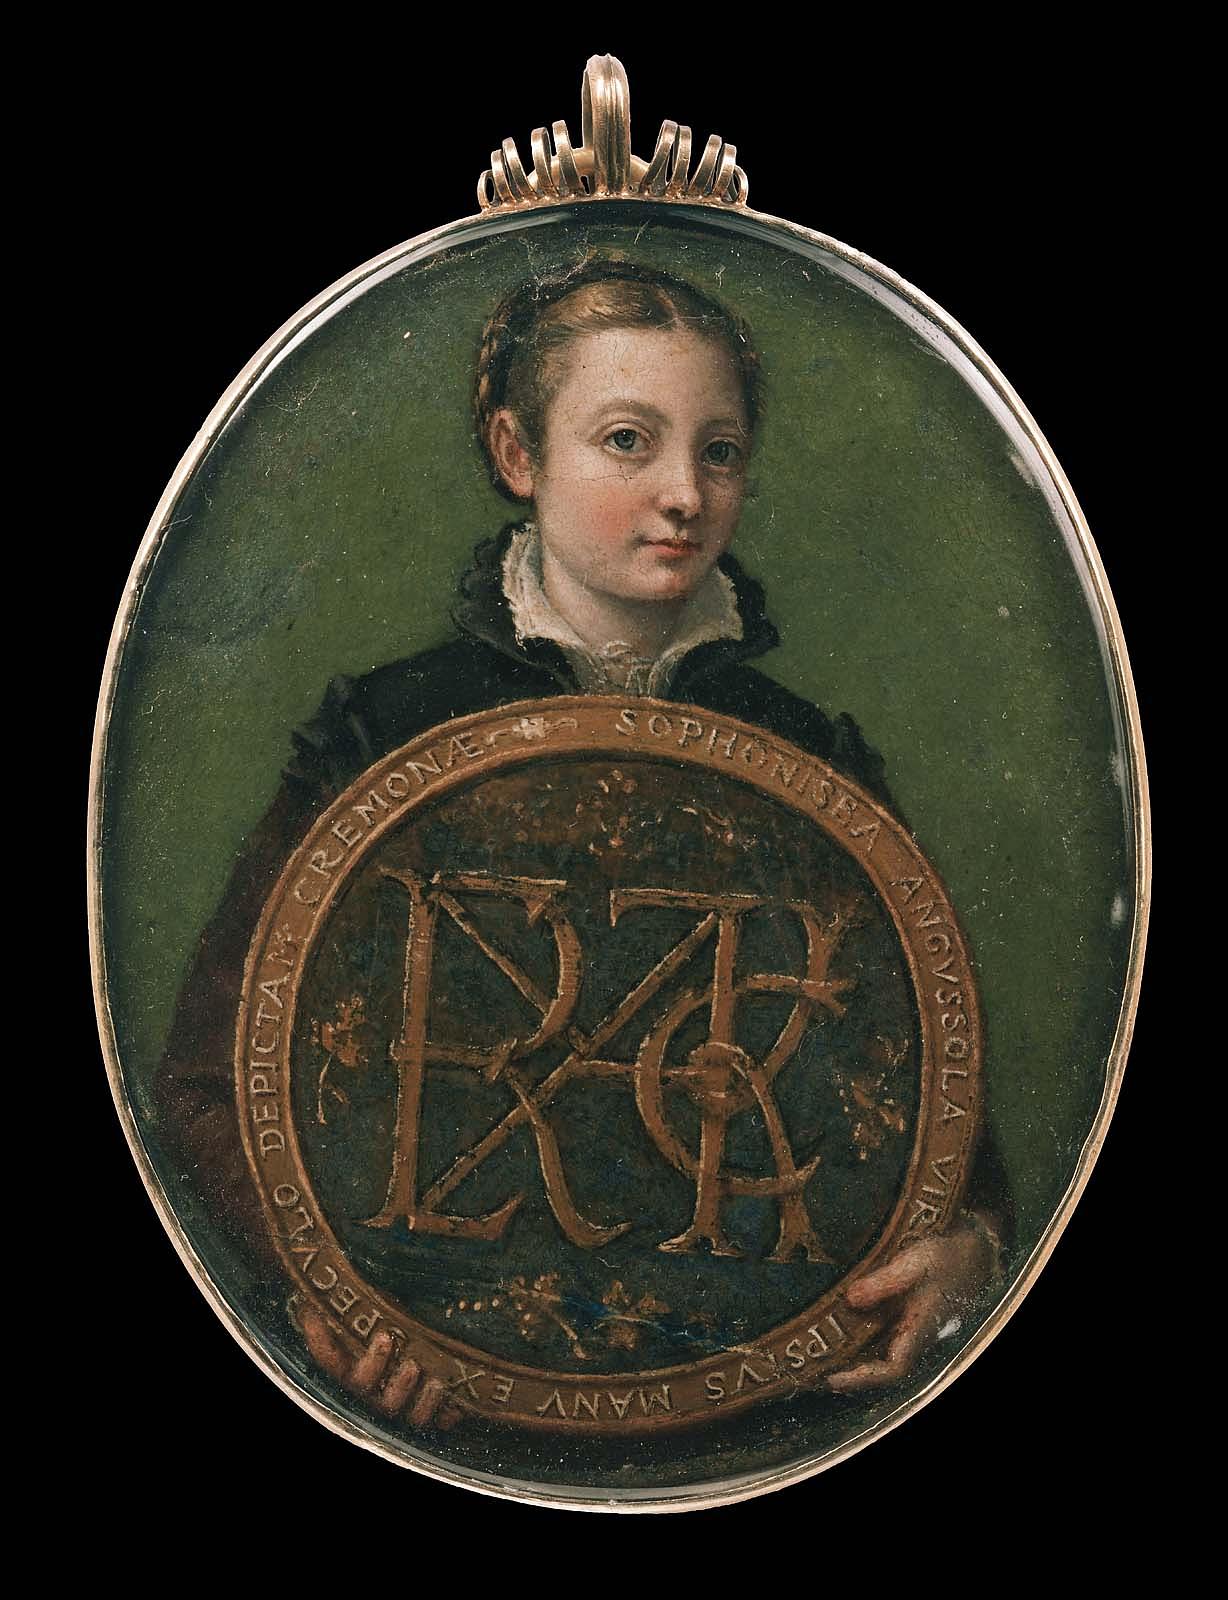 An oval self-portrait miniature of the artist at half-length, standing in front of a green background. She looks directly at the viewer with a slight smile. She is holding a round plaque that identifies her.